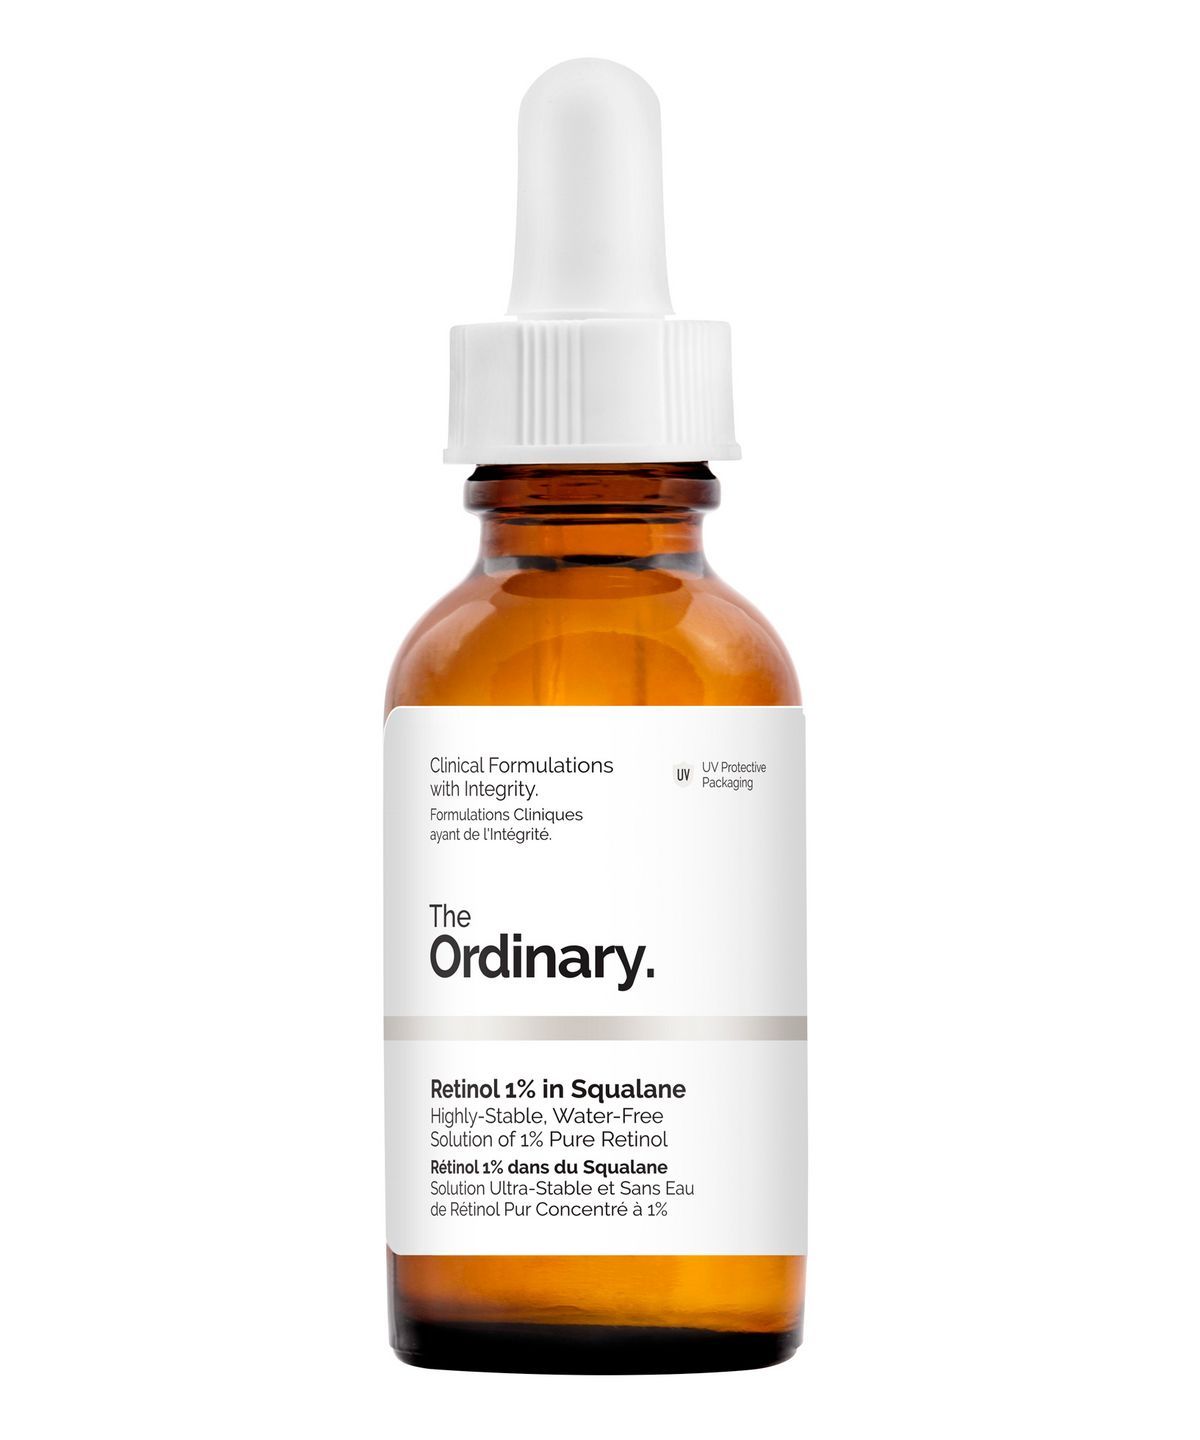 Retinol 1% in Squalane by The Ordinary in UAE at Shopey.ae